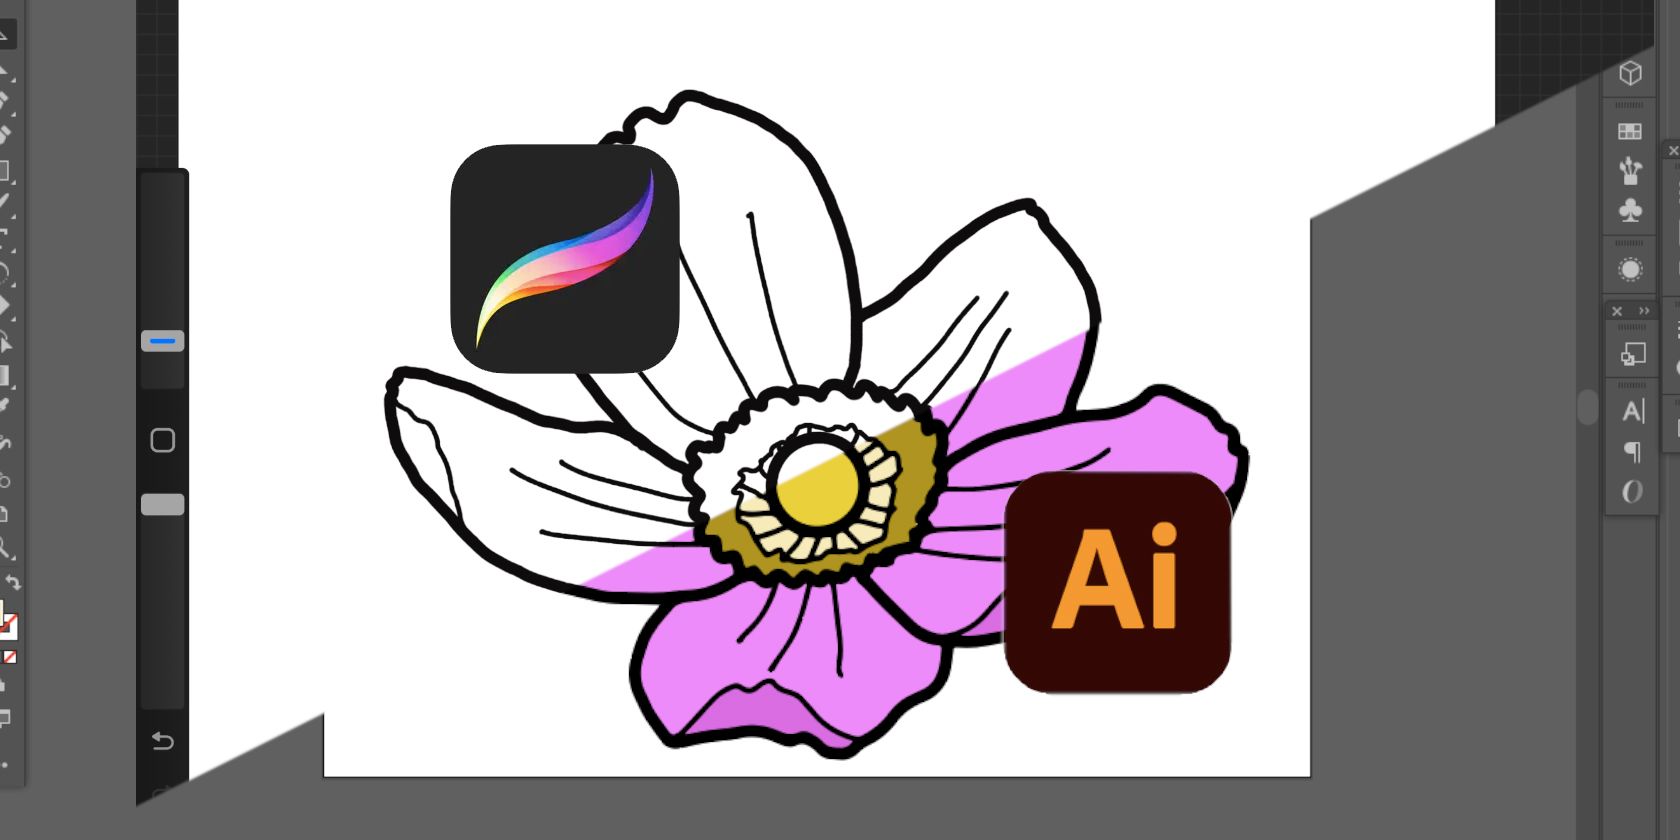 How to Vectorize and Colorize Your Procreate Drawings With Adobe Illustrator